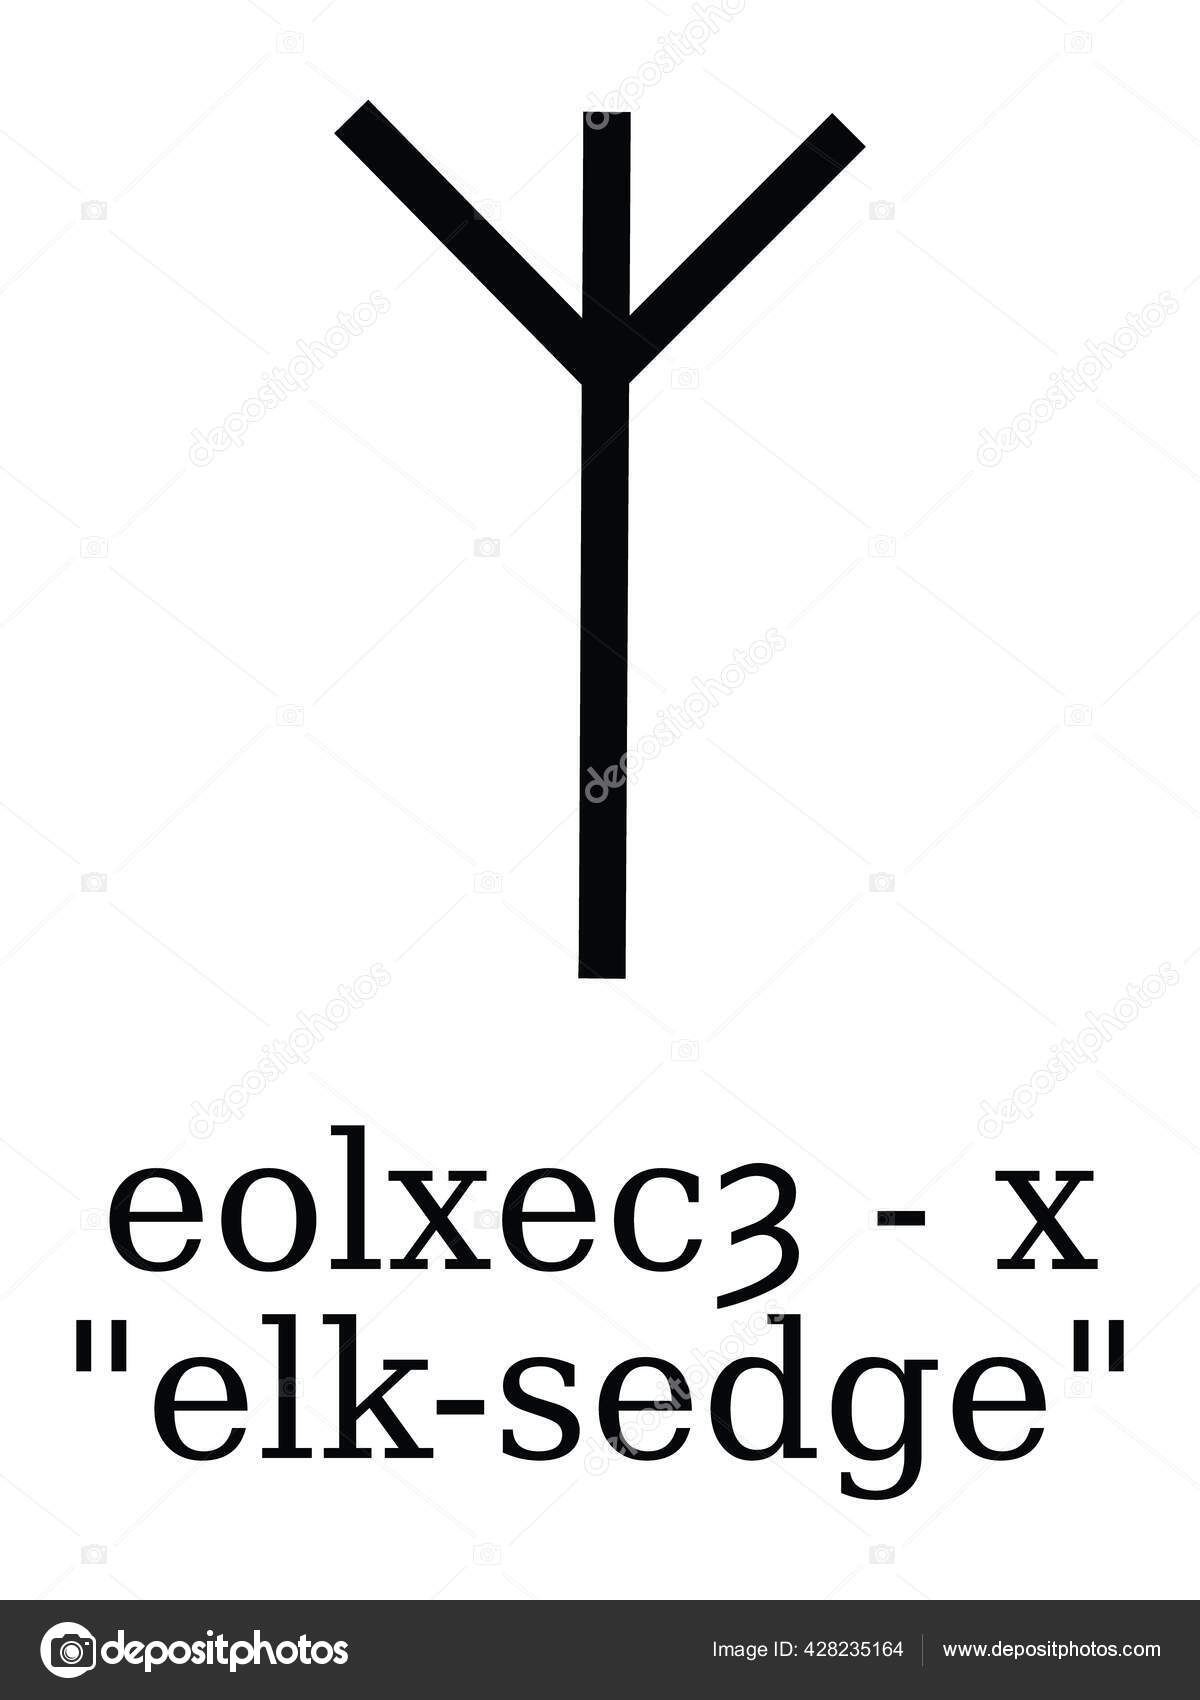 Anglo Saxon Rune Poem Stanza English Alphabet Letter Equivalent Anglo Vector Image By C Momcilo Jovanov Vector Stock